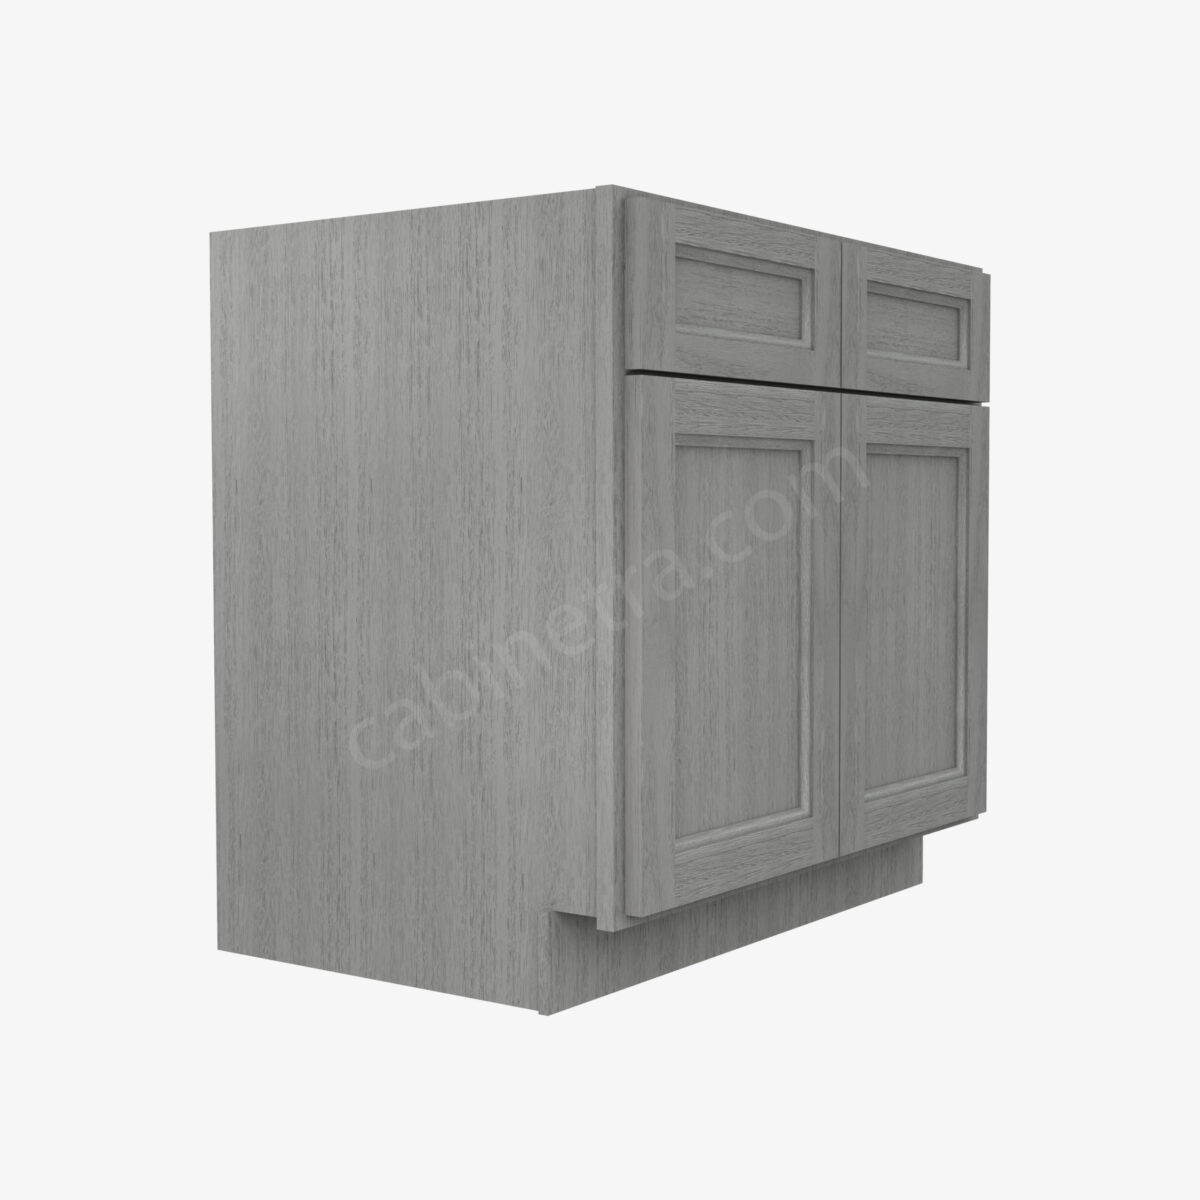 TG B33B 4 Forevermark Midtown Grey Cabinetra scaled